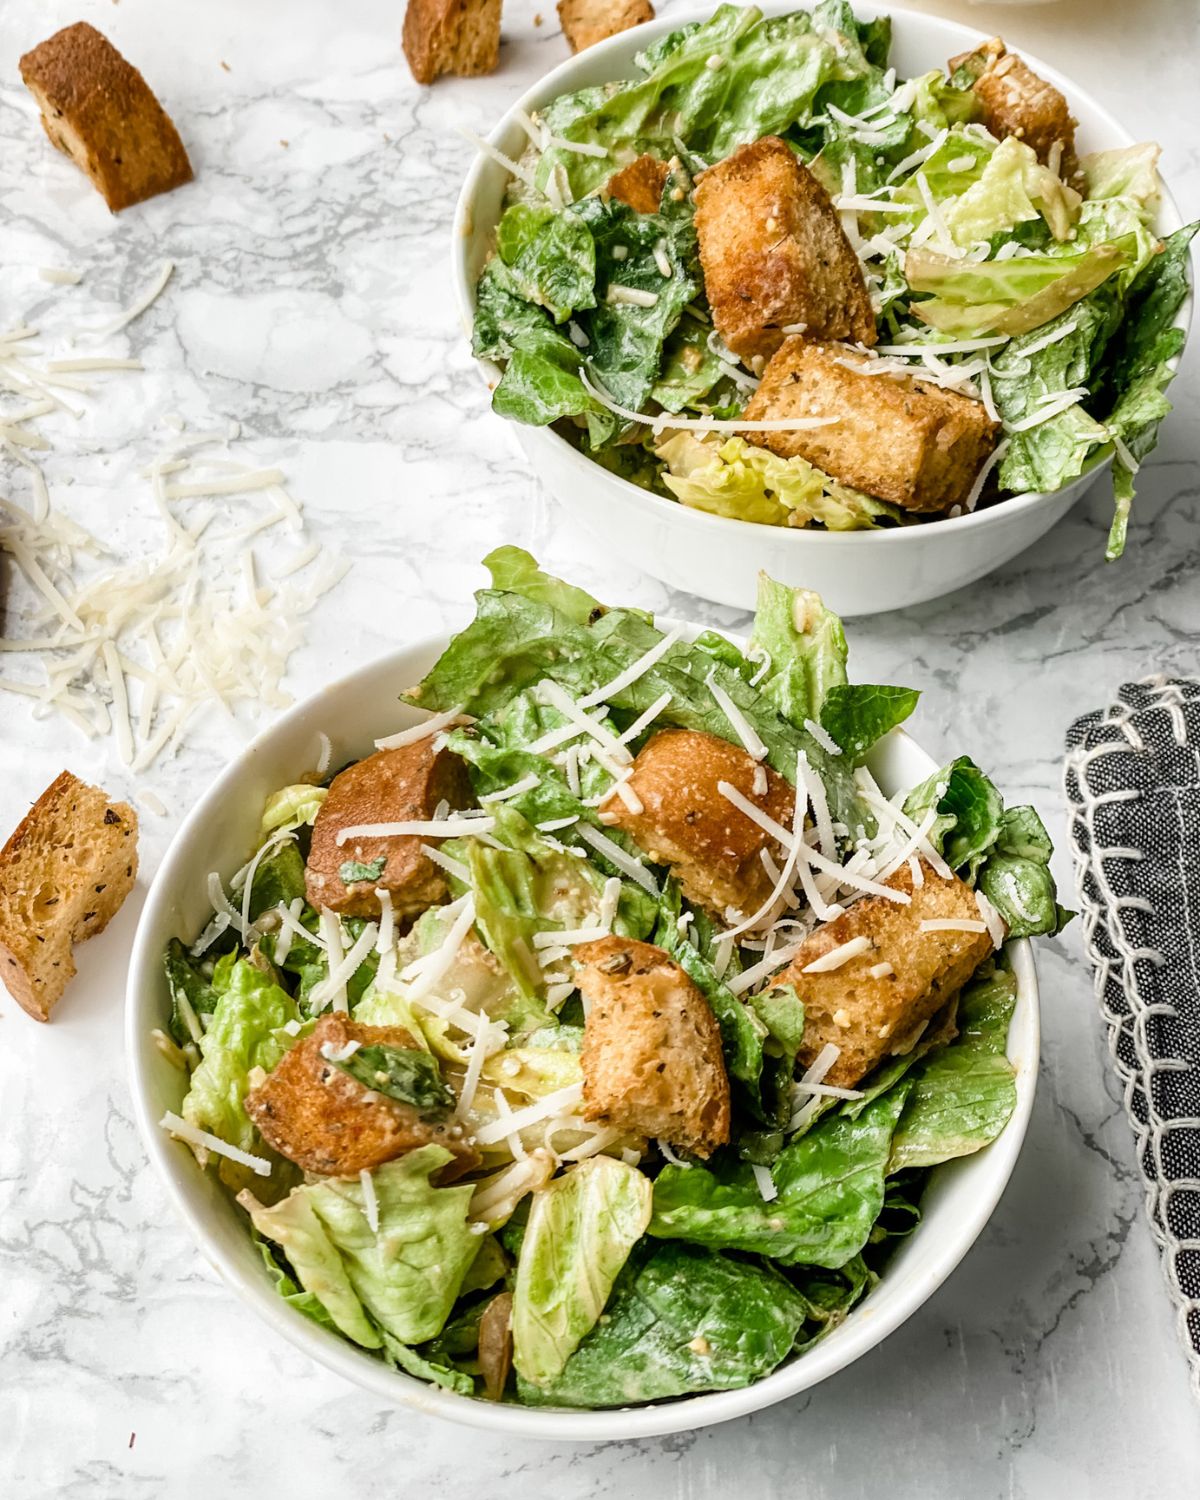 gluten free caesar salad with homemade croutons.